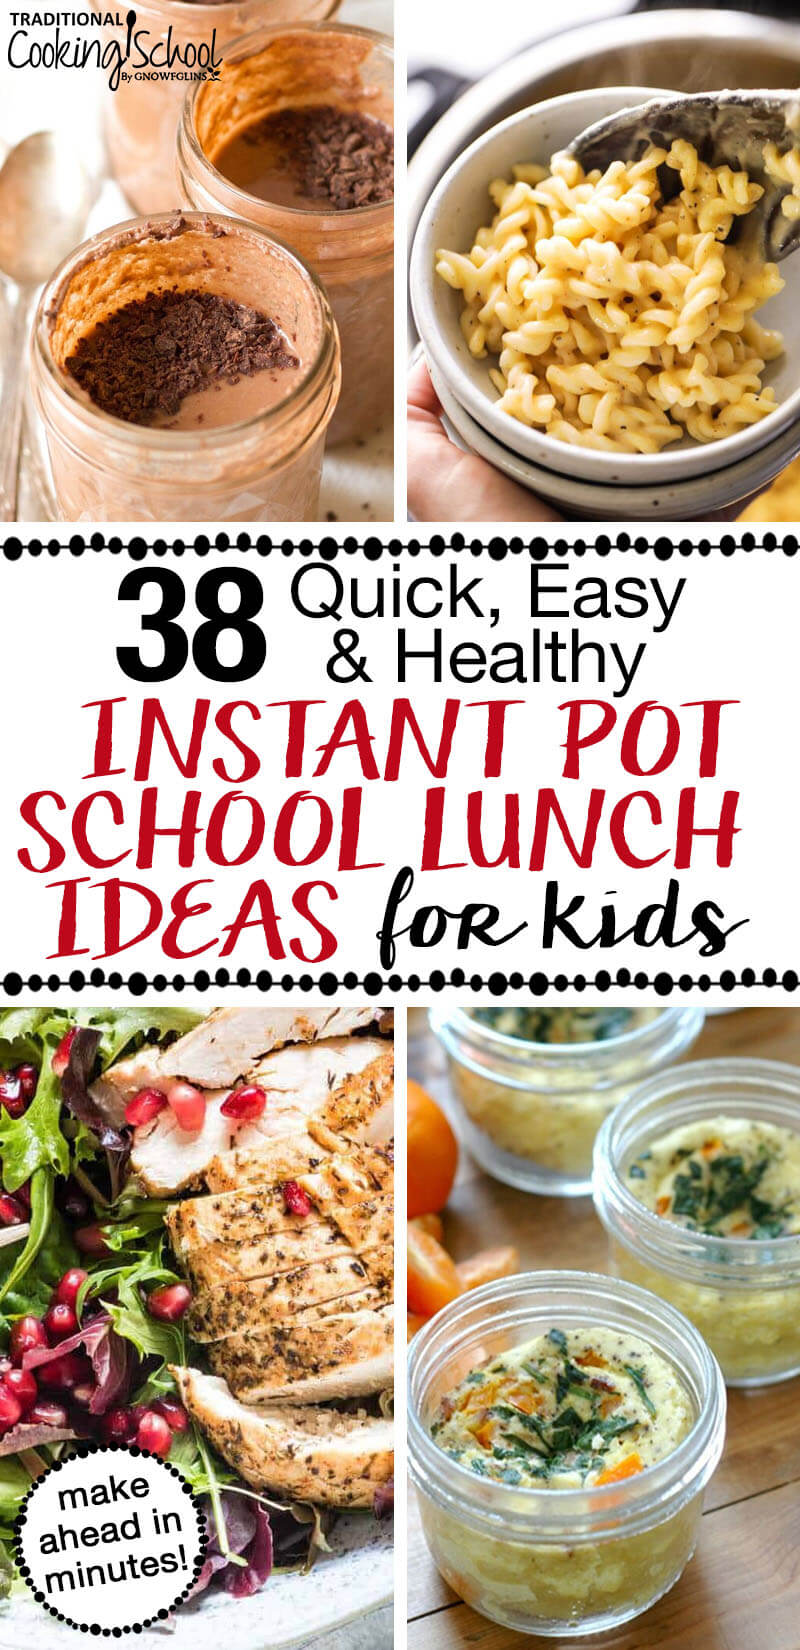 Get out your Instant Pots and get ready for the school year with this collection of healthy, hot and cold Instant Pot school lunch ideas for kids! Did you know that make ahead lunches are even easier if you use your Instant Pot? Yes! Whether your family is grain-free, dairy-free, or has a few picky eaters, we've got you covered! #tradcookschool #pressurecooking #schoollunchideas #lunchboxideas #instantpot #instantpotrecipes #healthylunch